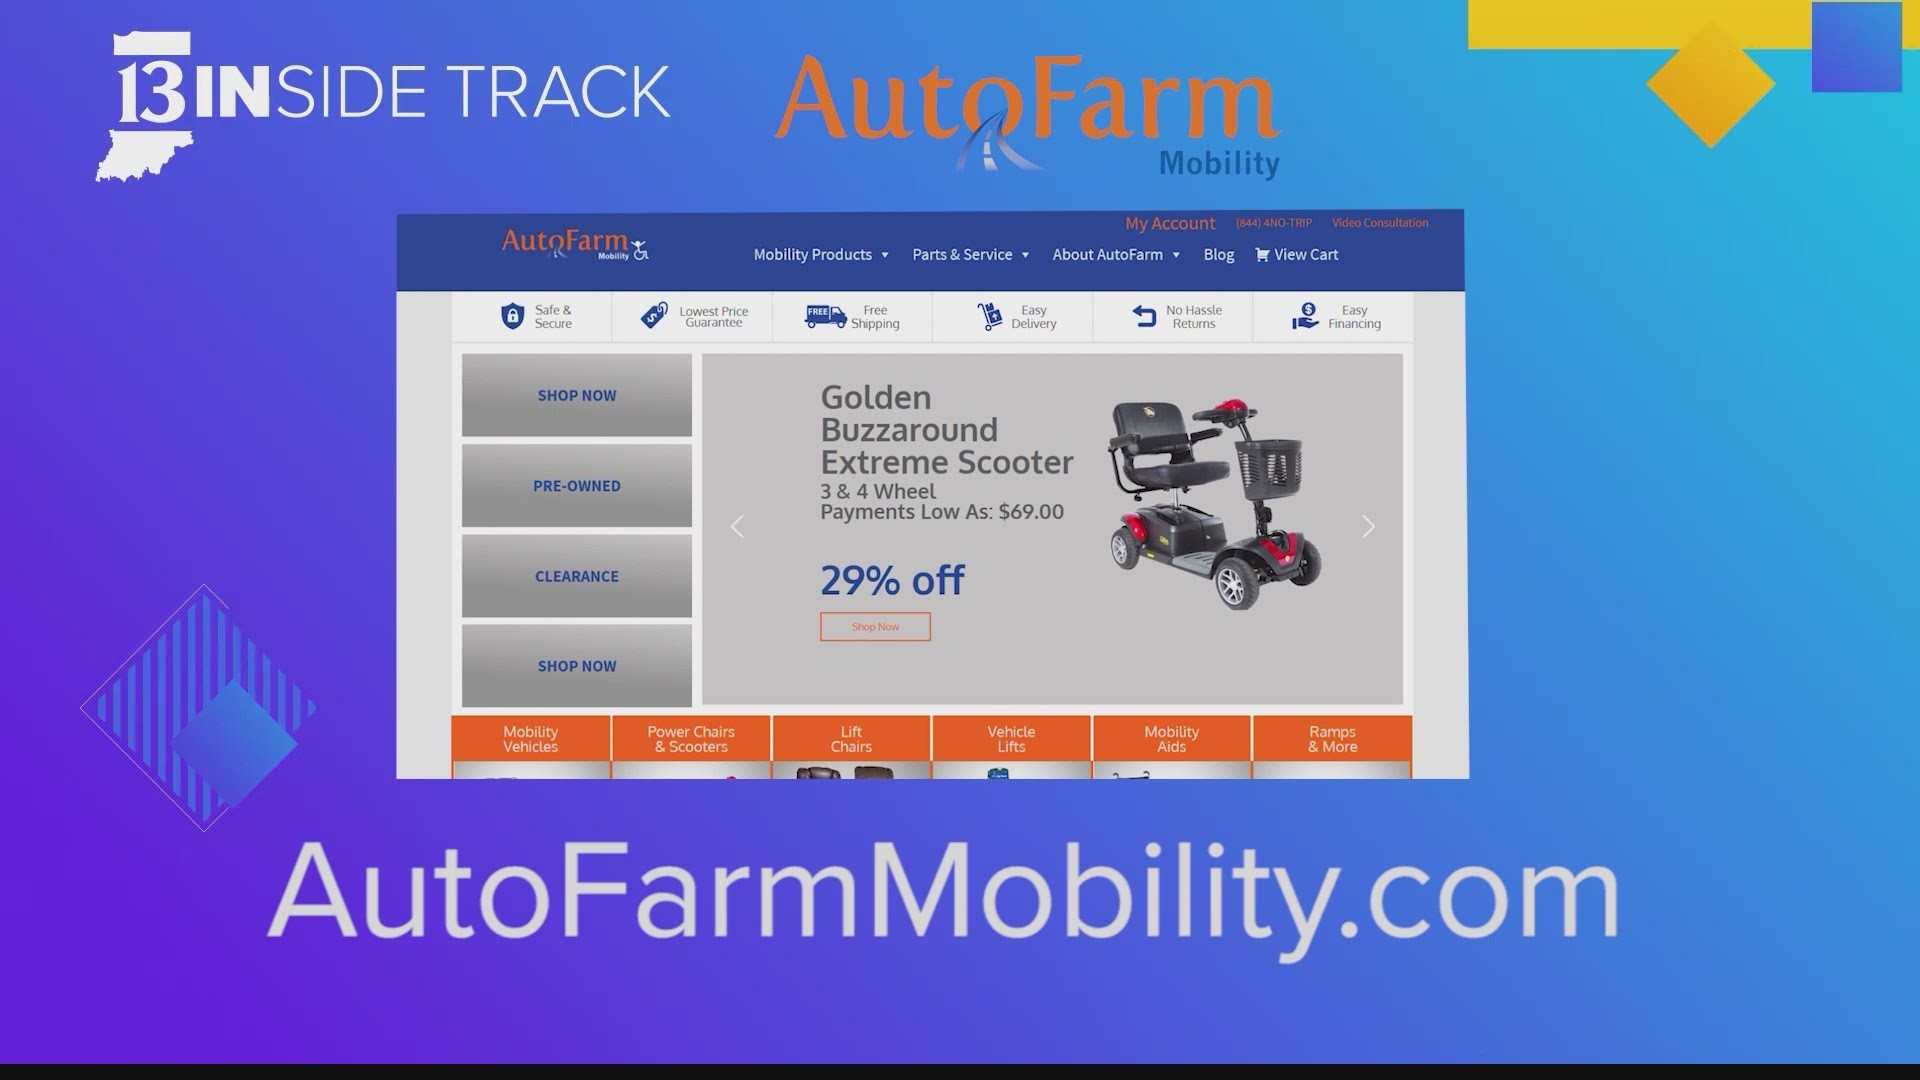 AutoFarm Mobility has a solution for anyone struggling with mobility.